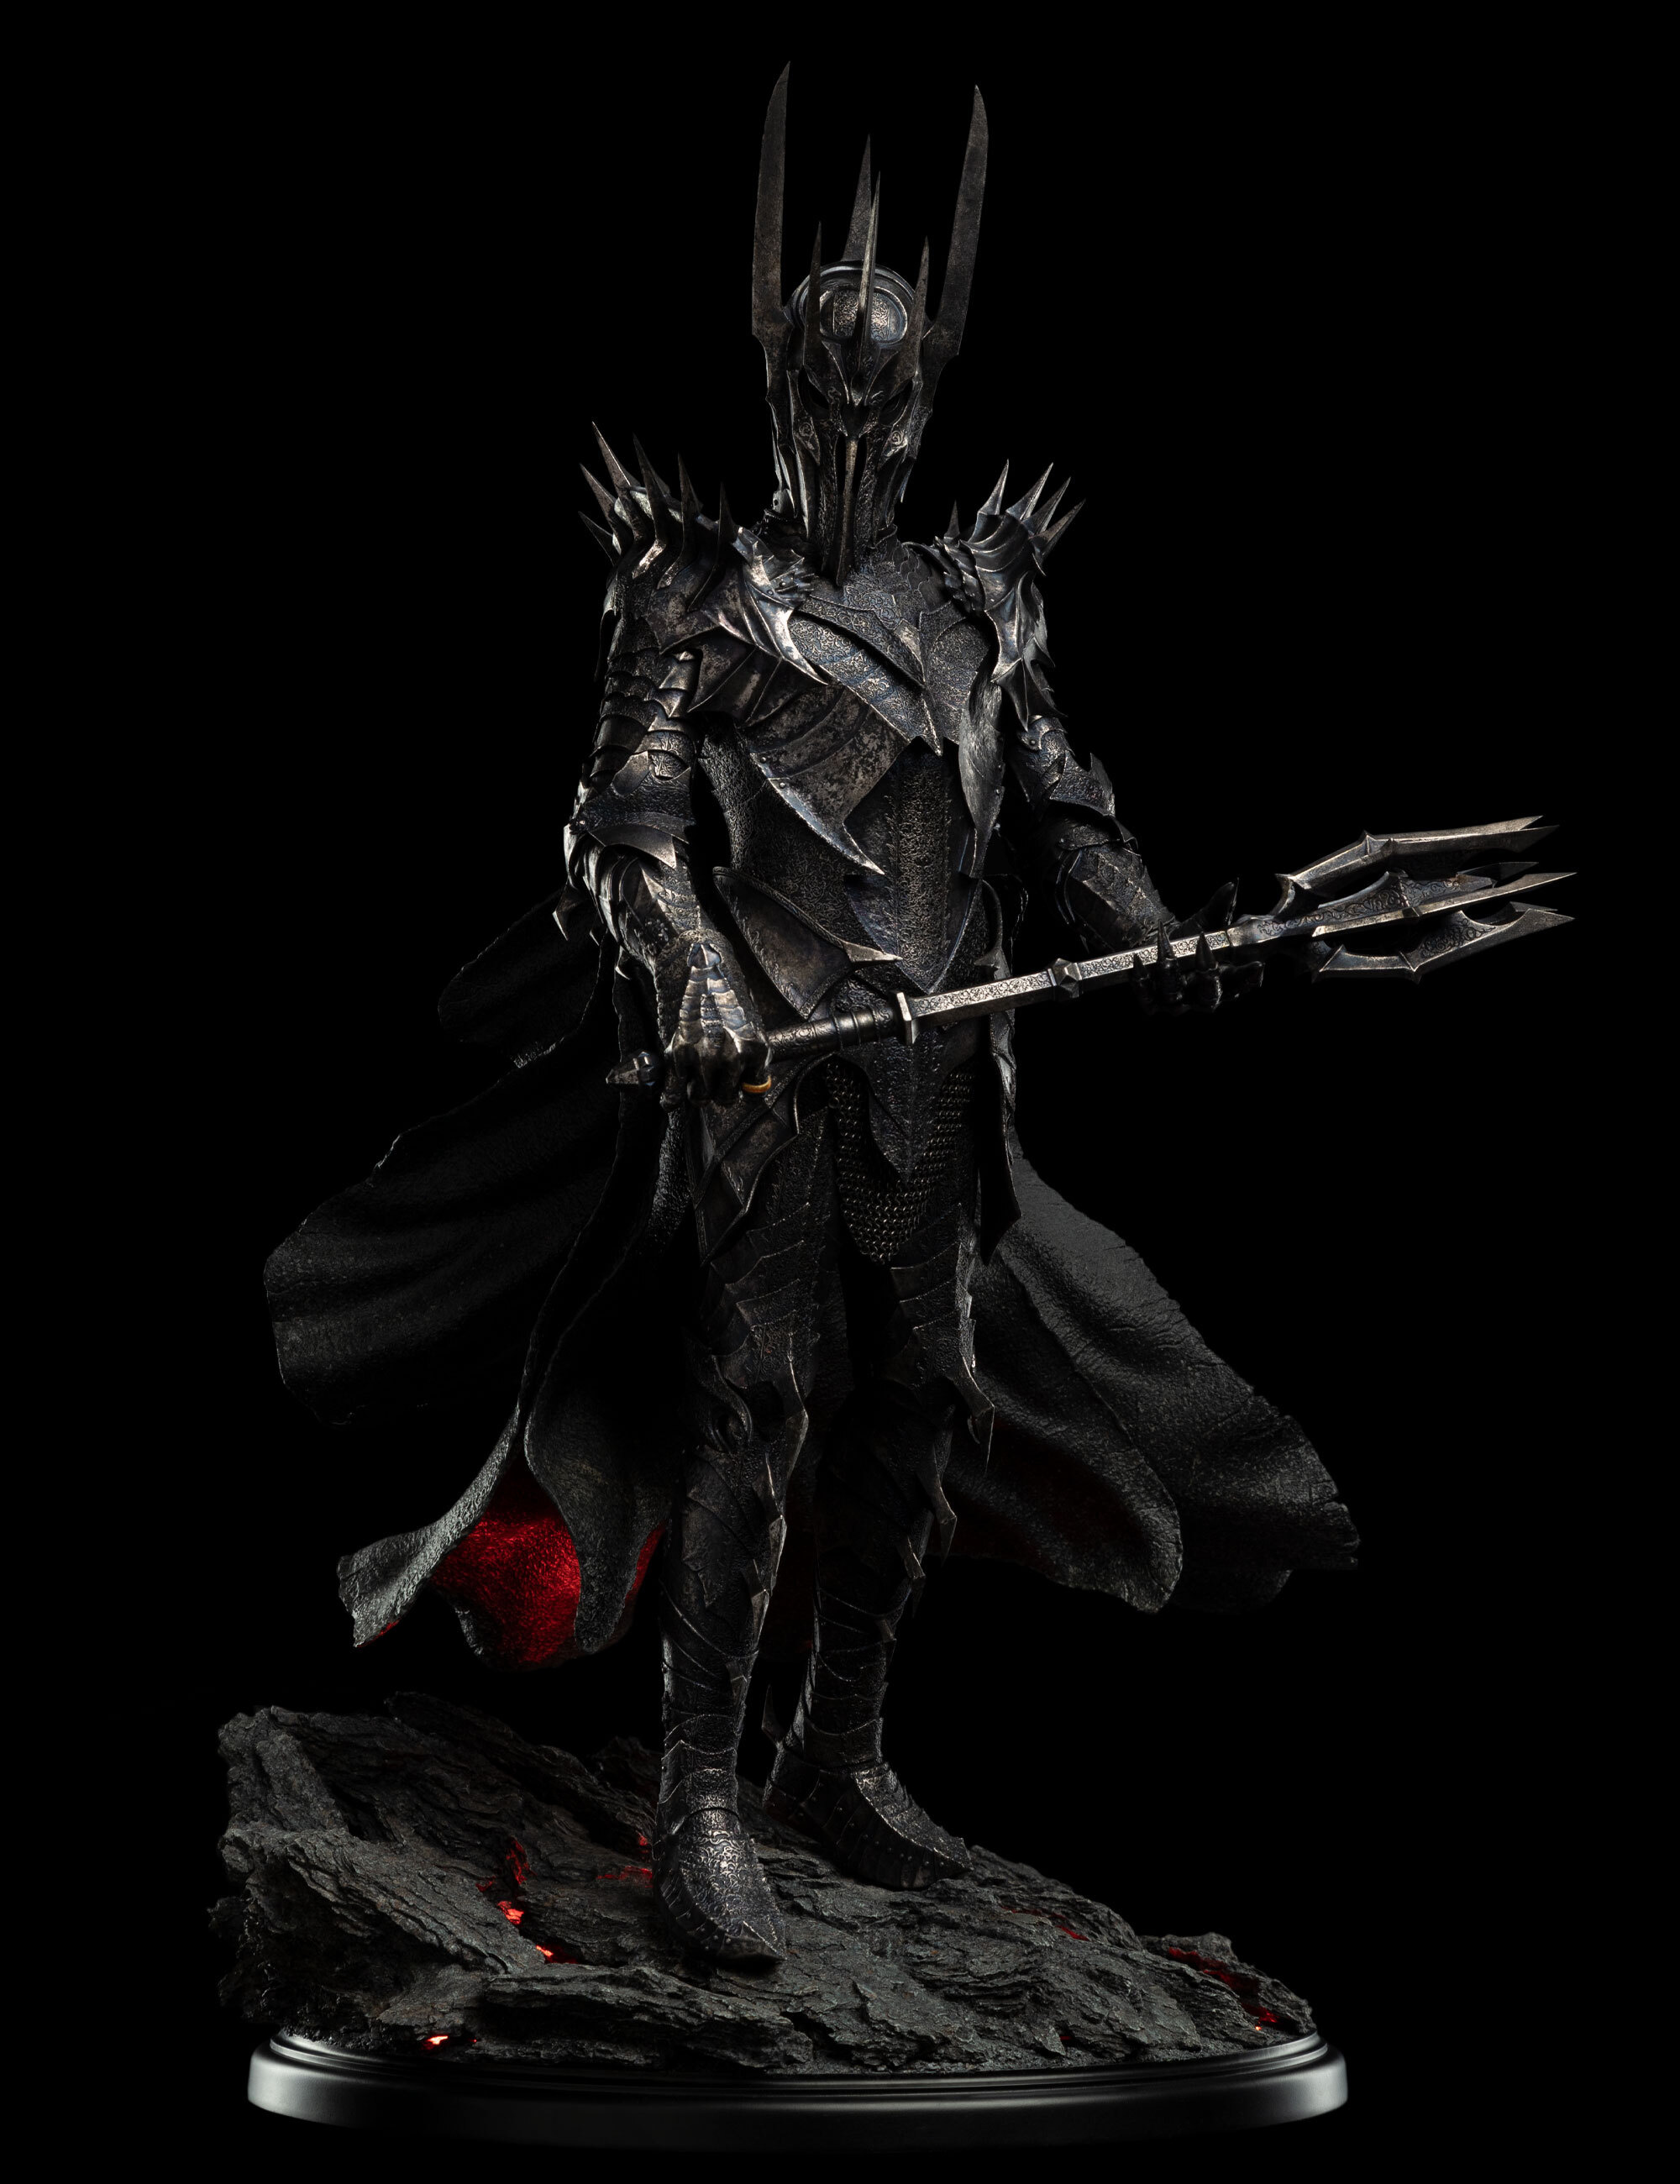 Lost in collectibles, Weta Sauron, Scale statue, 2000x2600 HD Handy